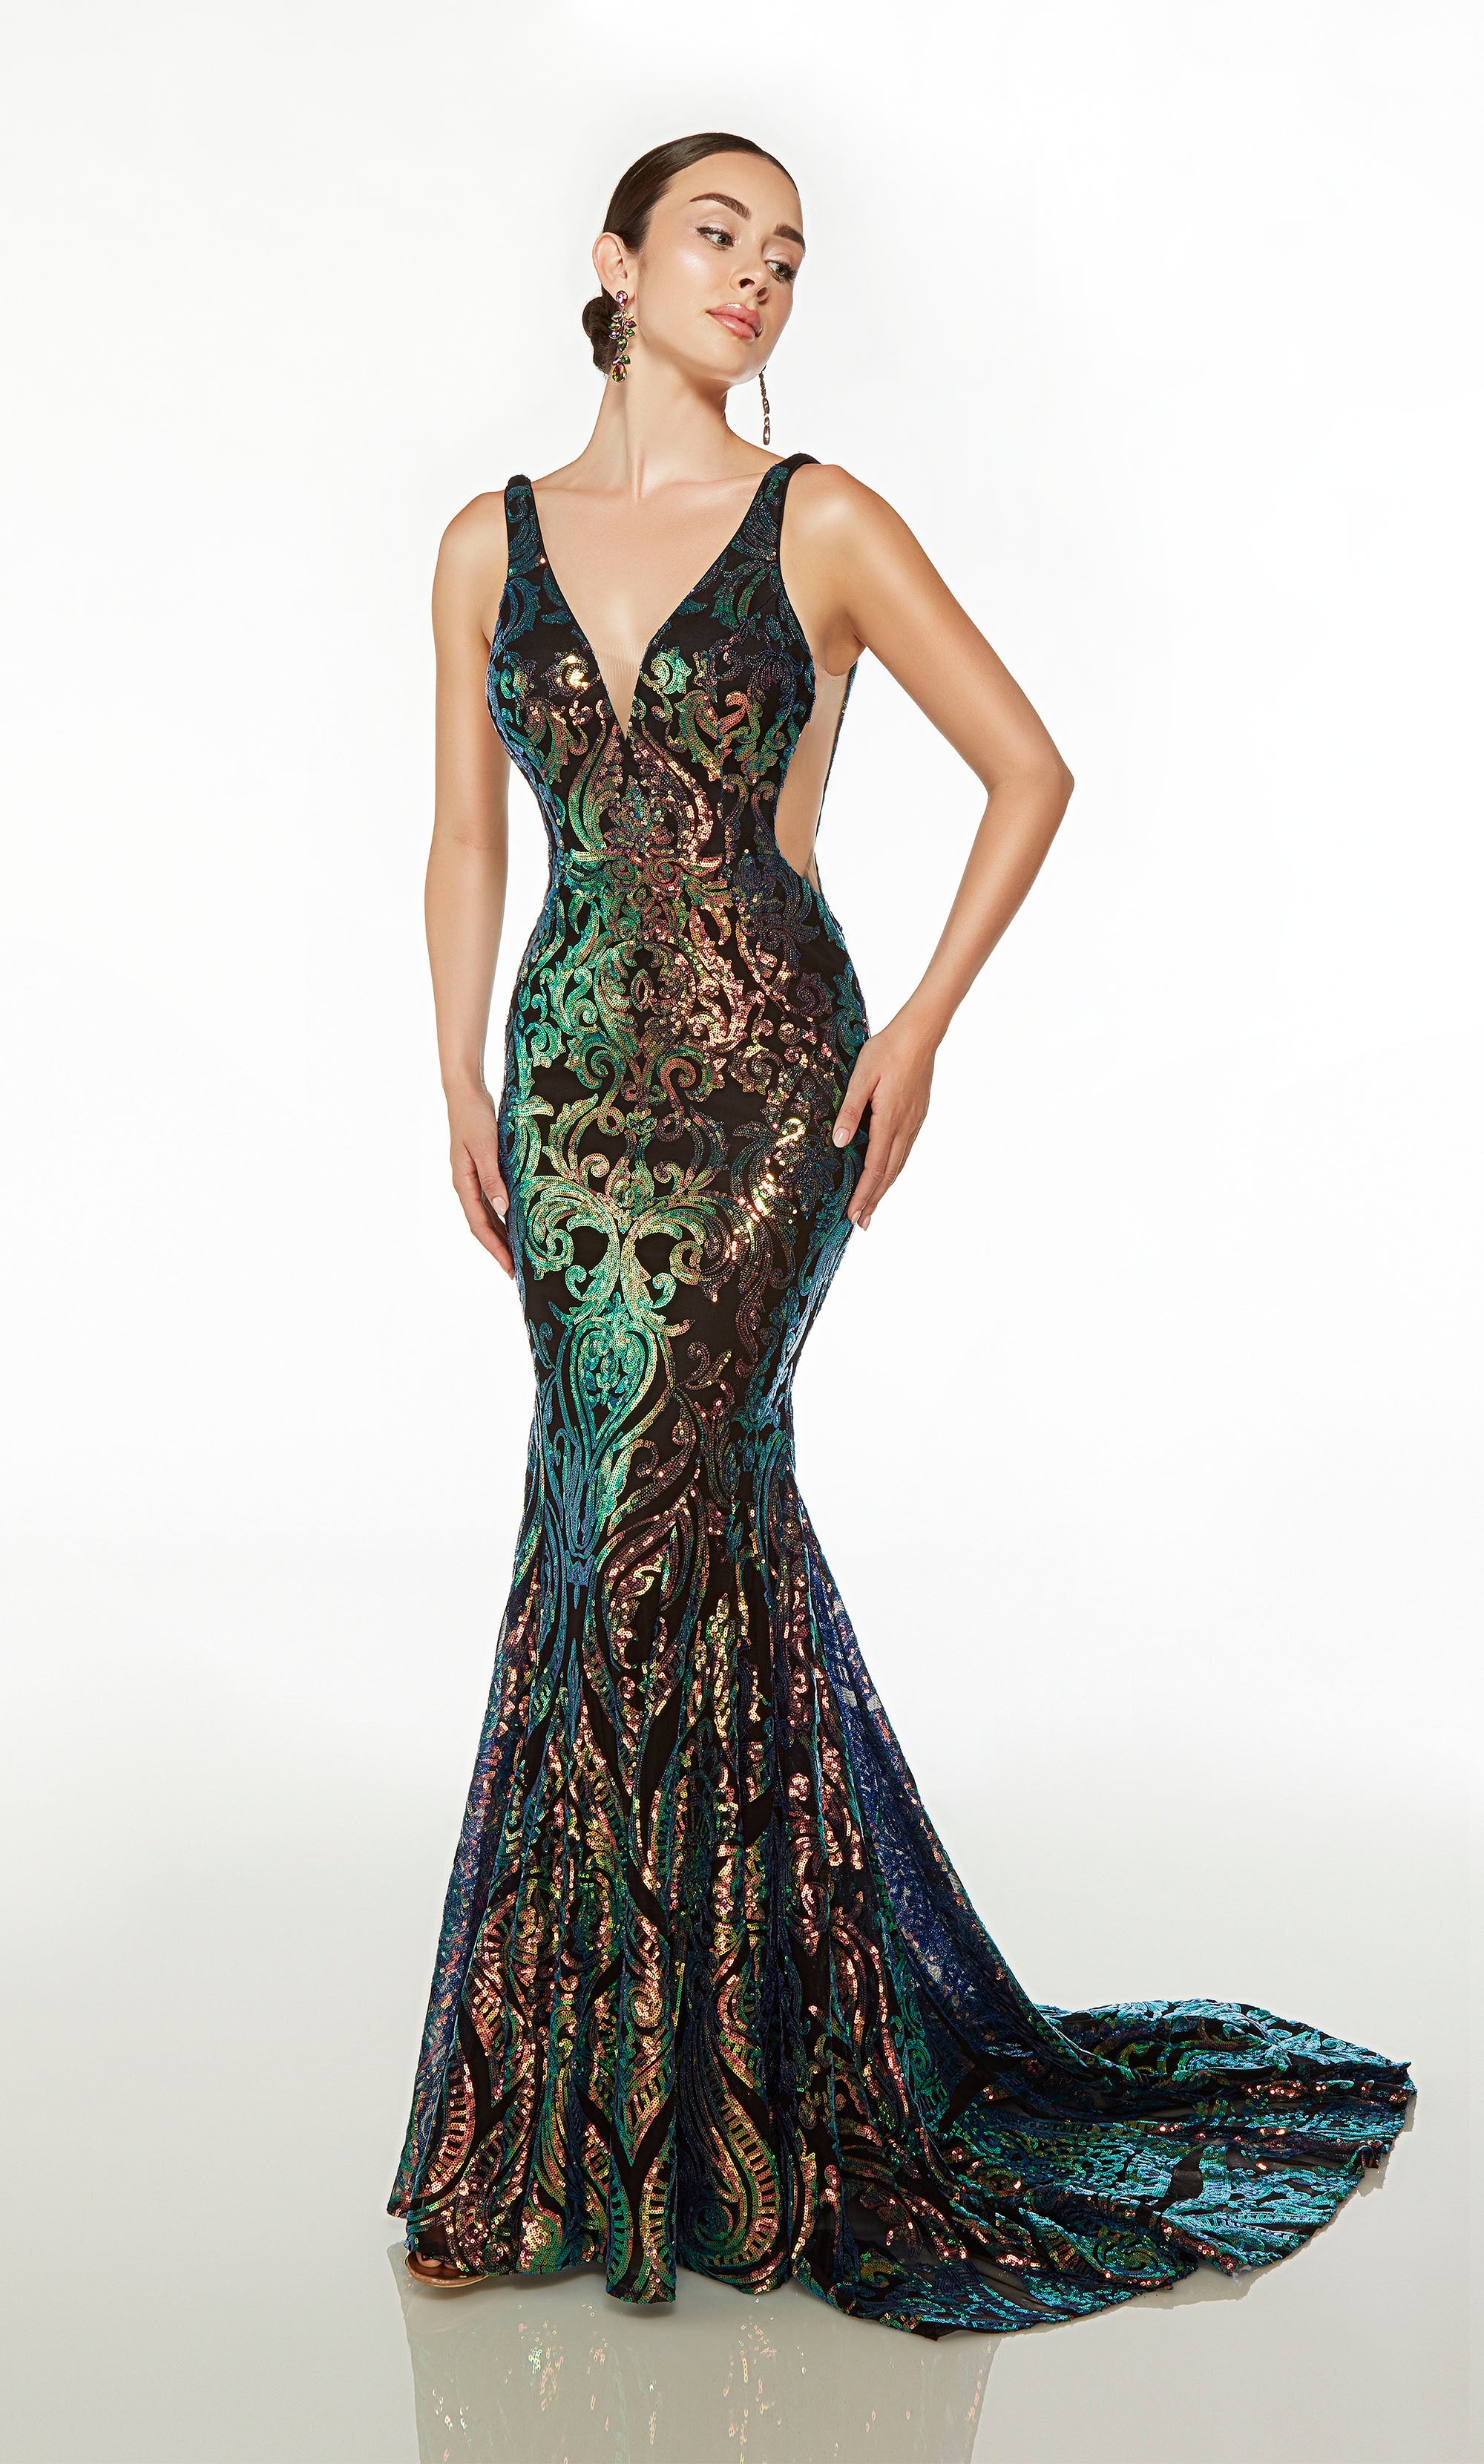 Elegant black mermaid gown: Plunging neckline, illusion side cutouts, fitted bodice, open V-shaped back, long train, paisley-patterned iridescent sequins.